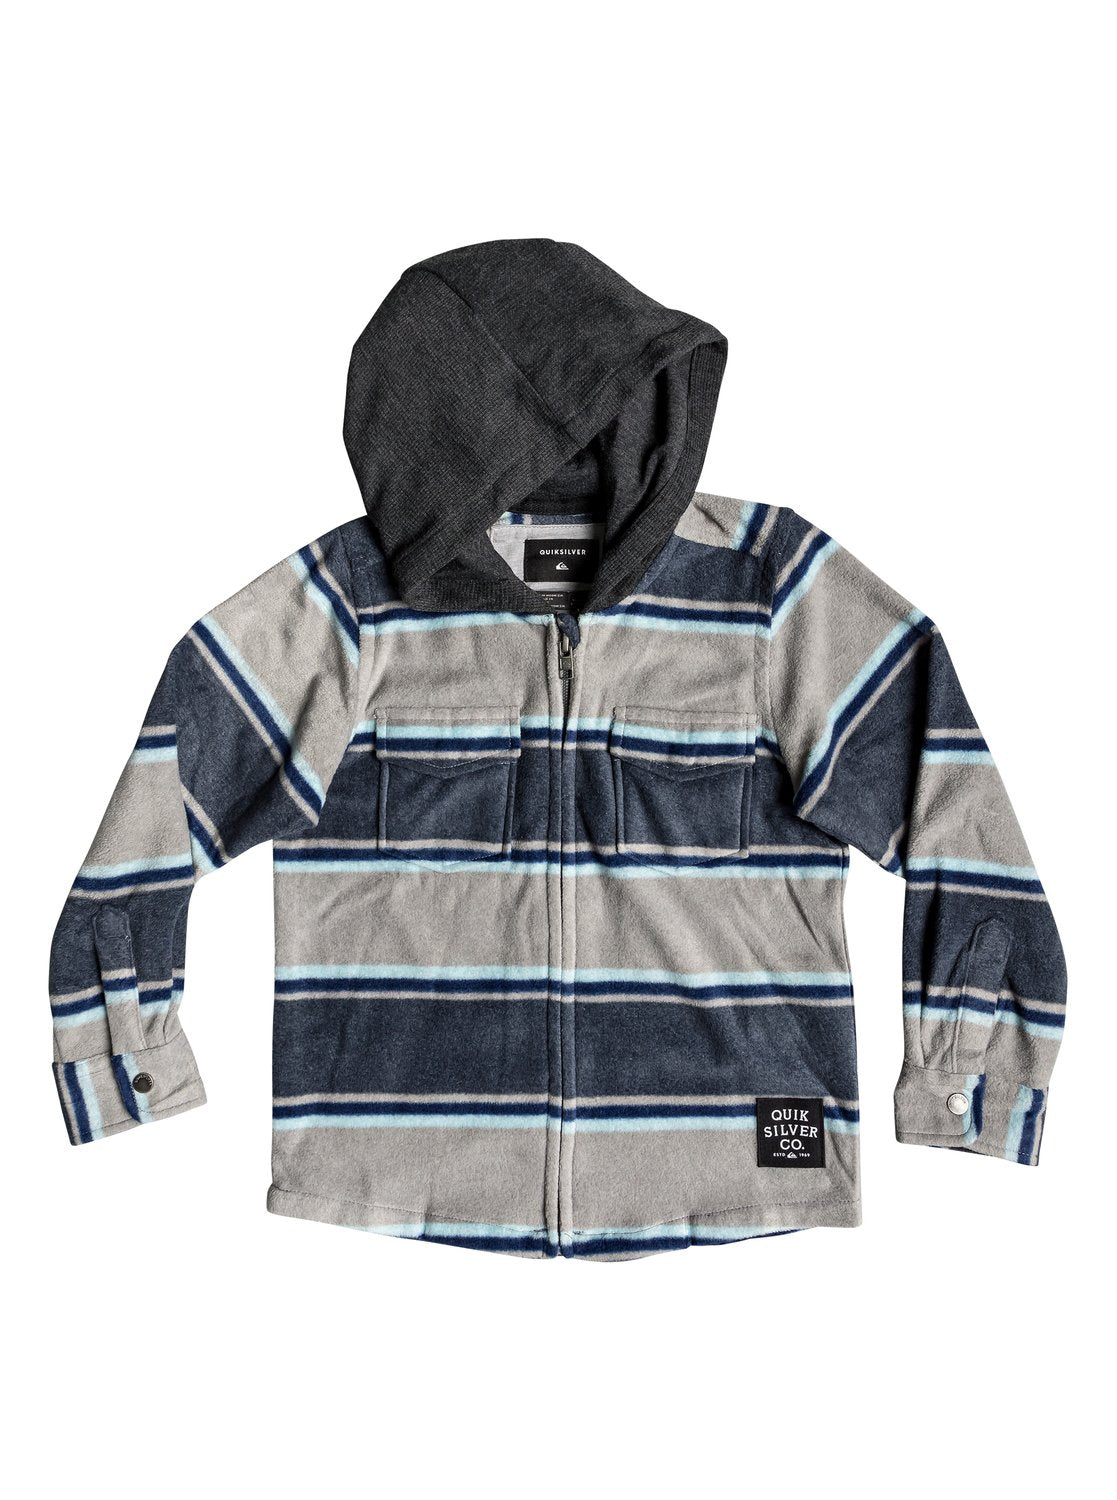 Quiksilver Surf Days Youth Jacket BST3 4